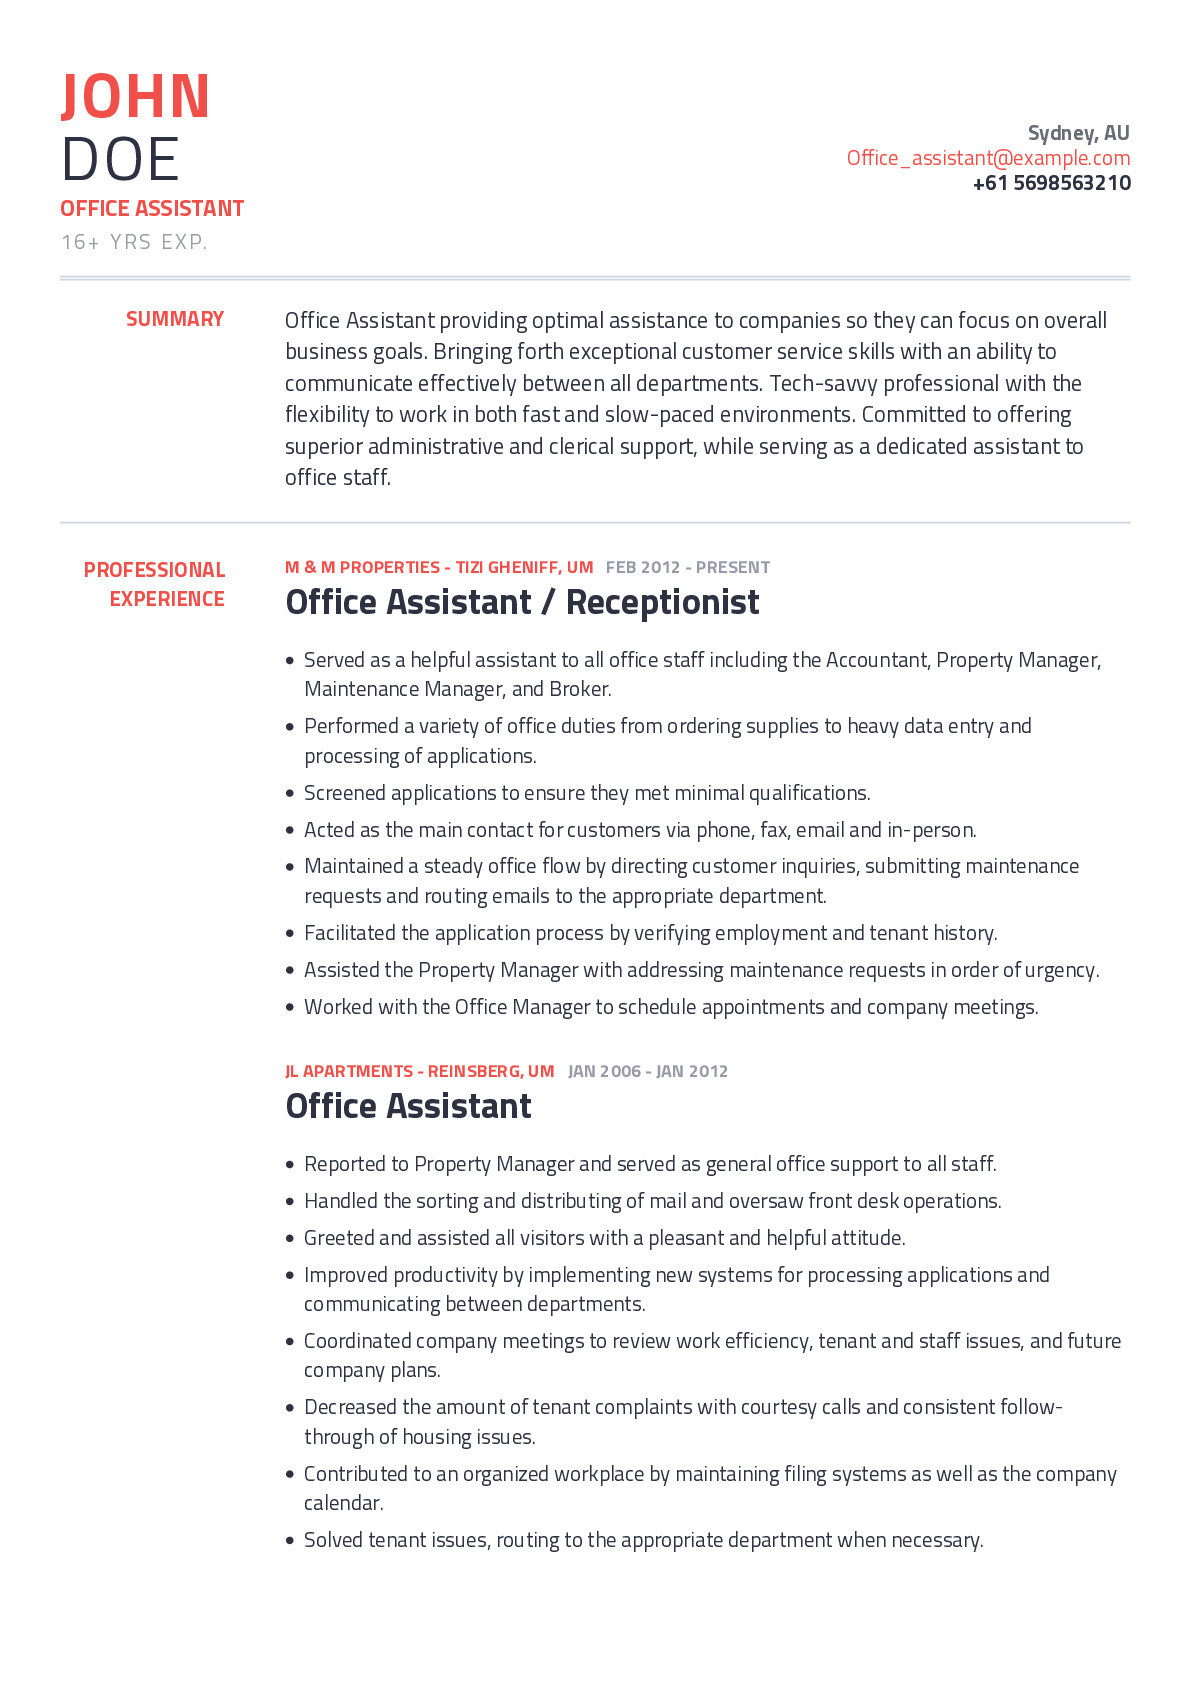 Animal Industry Office Manager Sample Resumes Office assistant Resume Example with Content Sample Craftmycv